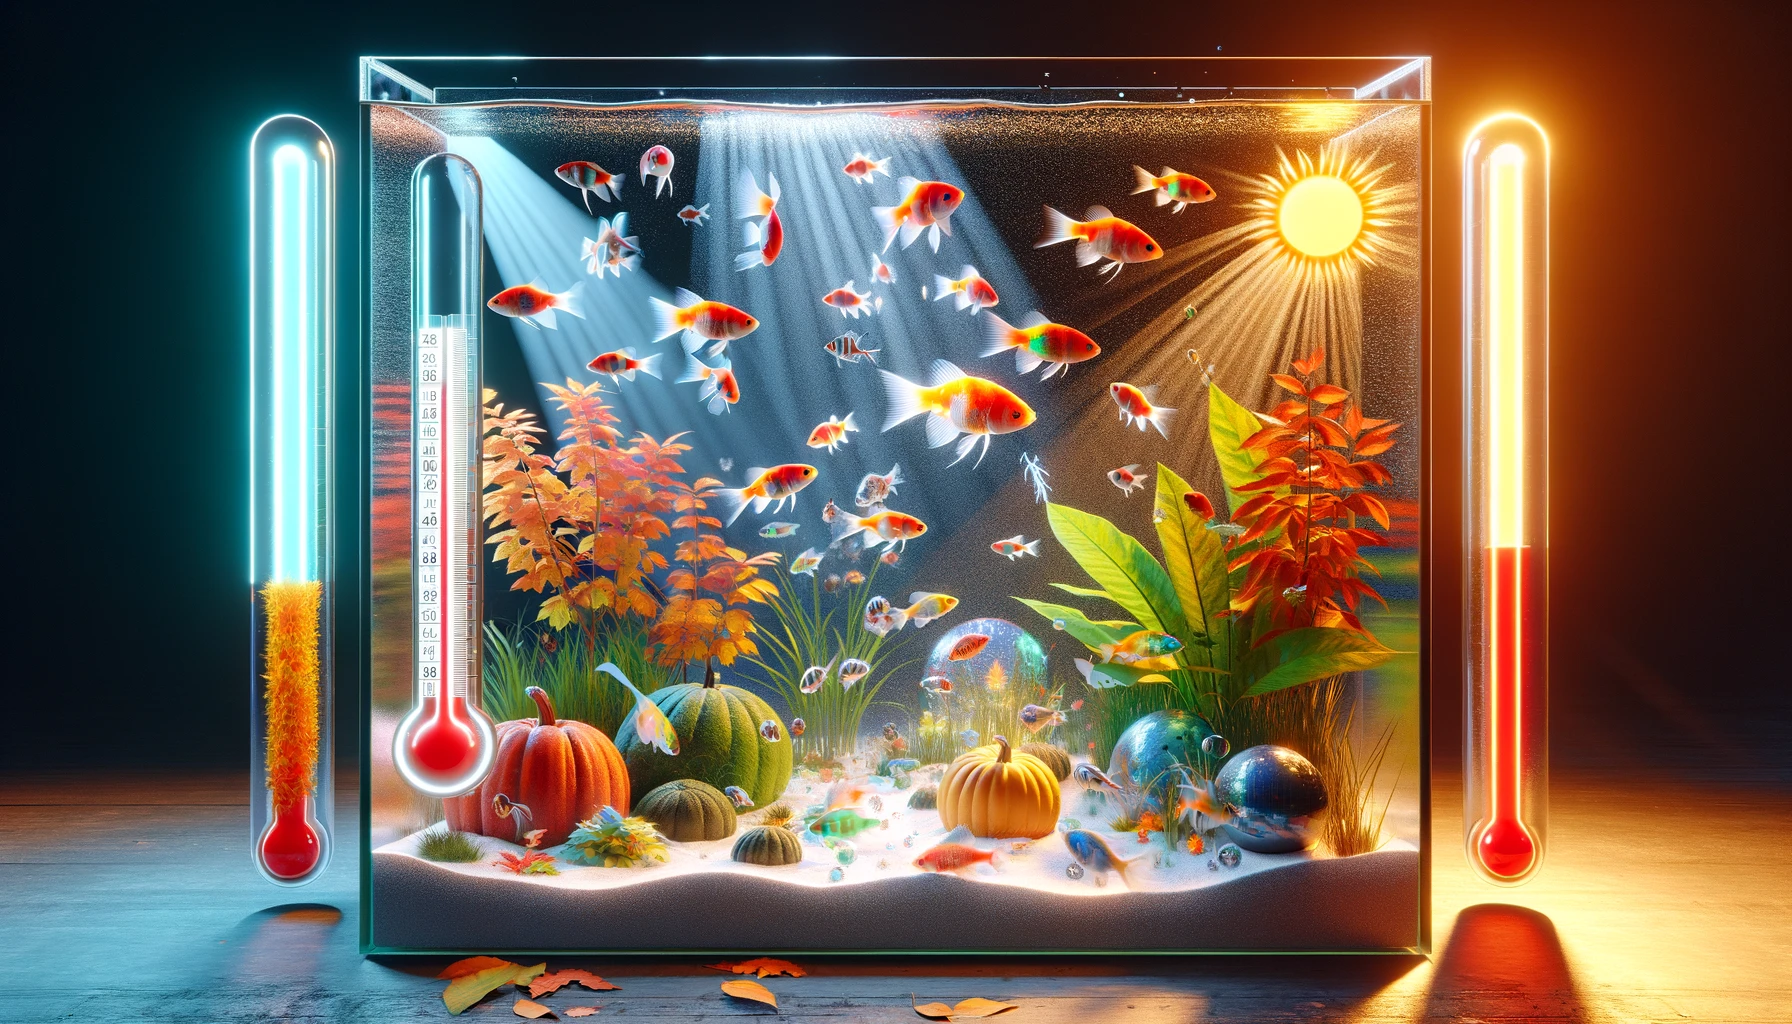 season and temperature on GloFish breeding in an aquarium setting. The image should depict a vivid and real